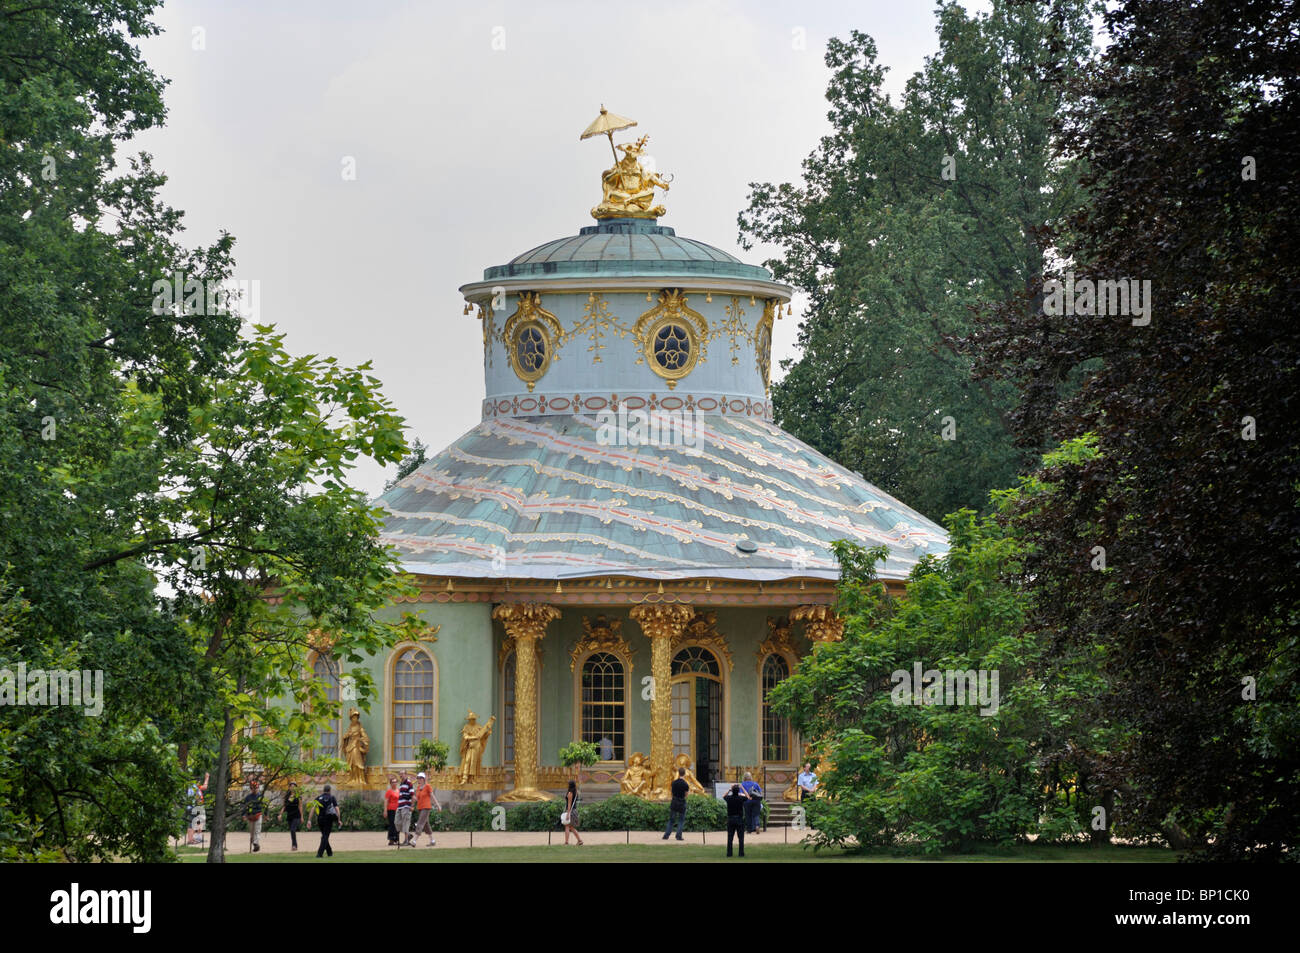 Visitors walk past the Chinese Teahouse at the Park Sanssouci in Potsdam, eastern Germany July 2010 Stock Photo